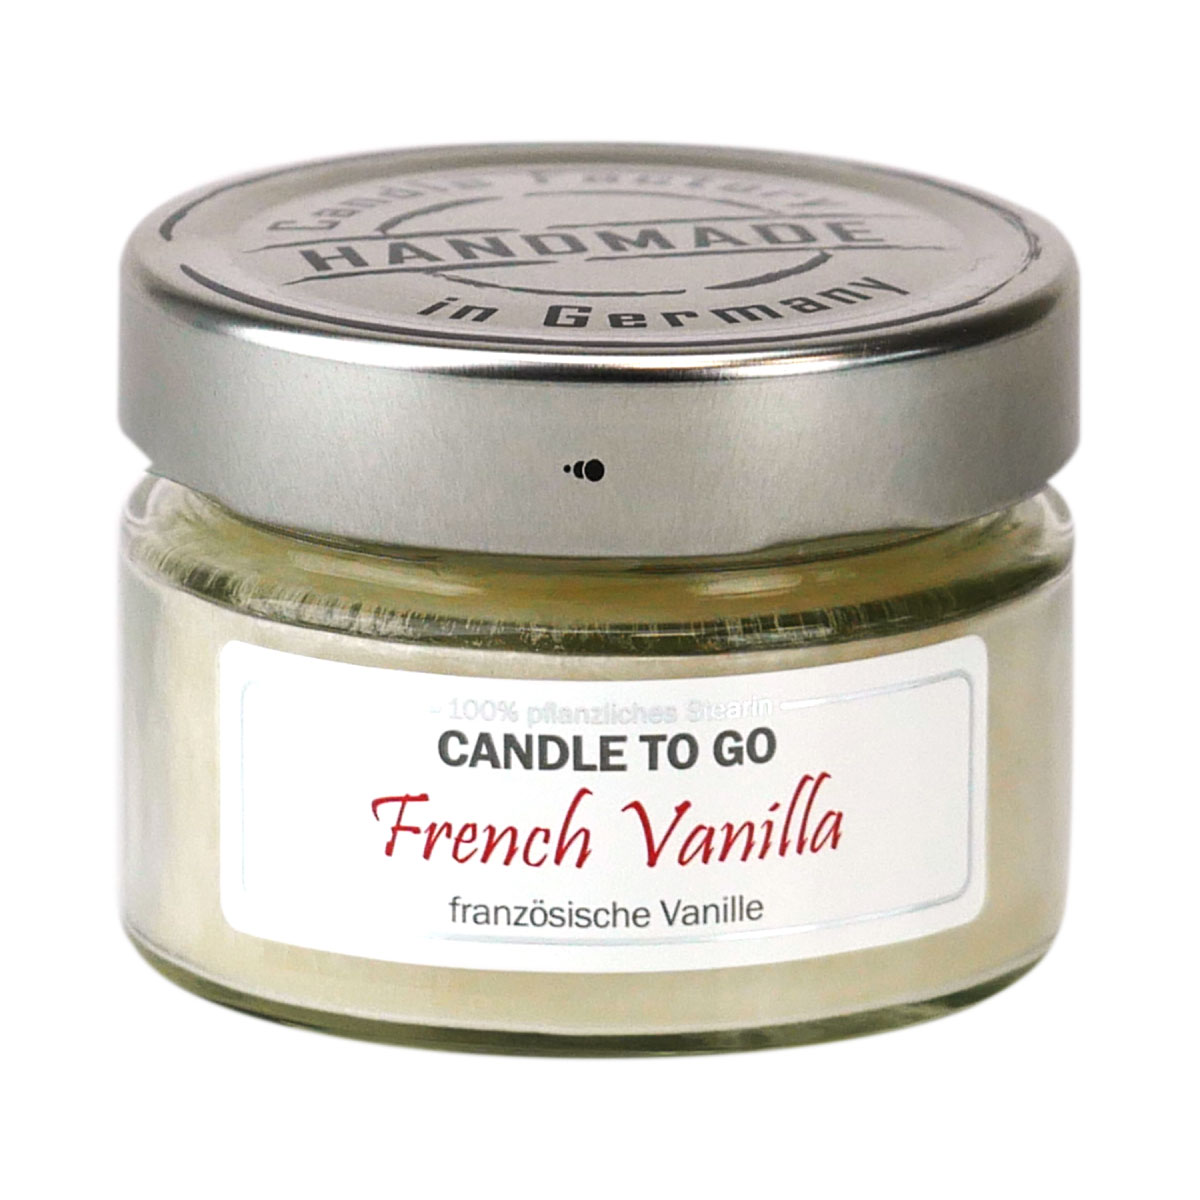 French Vanilla - Candle to Go Duftkerze von Candle Factory